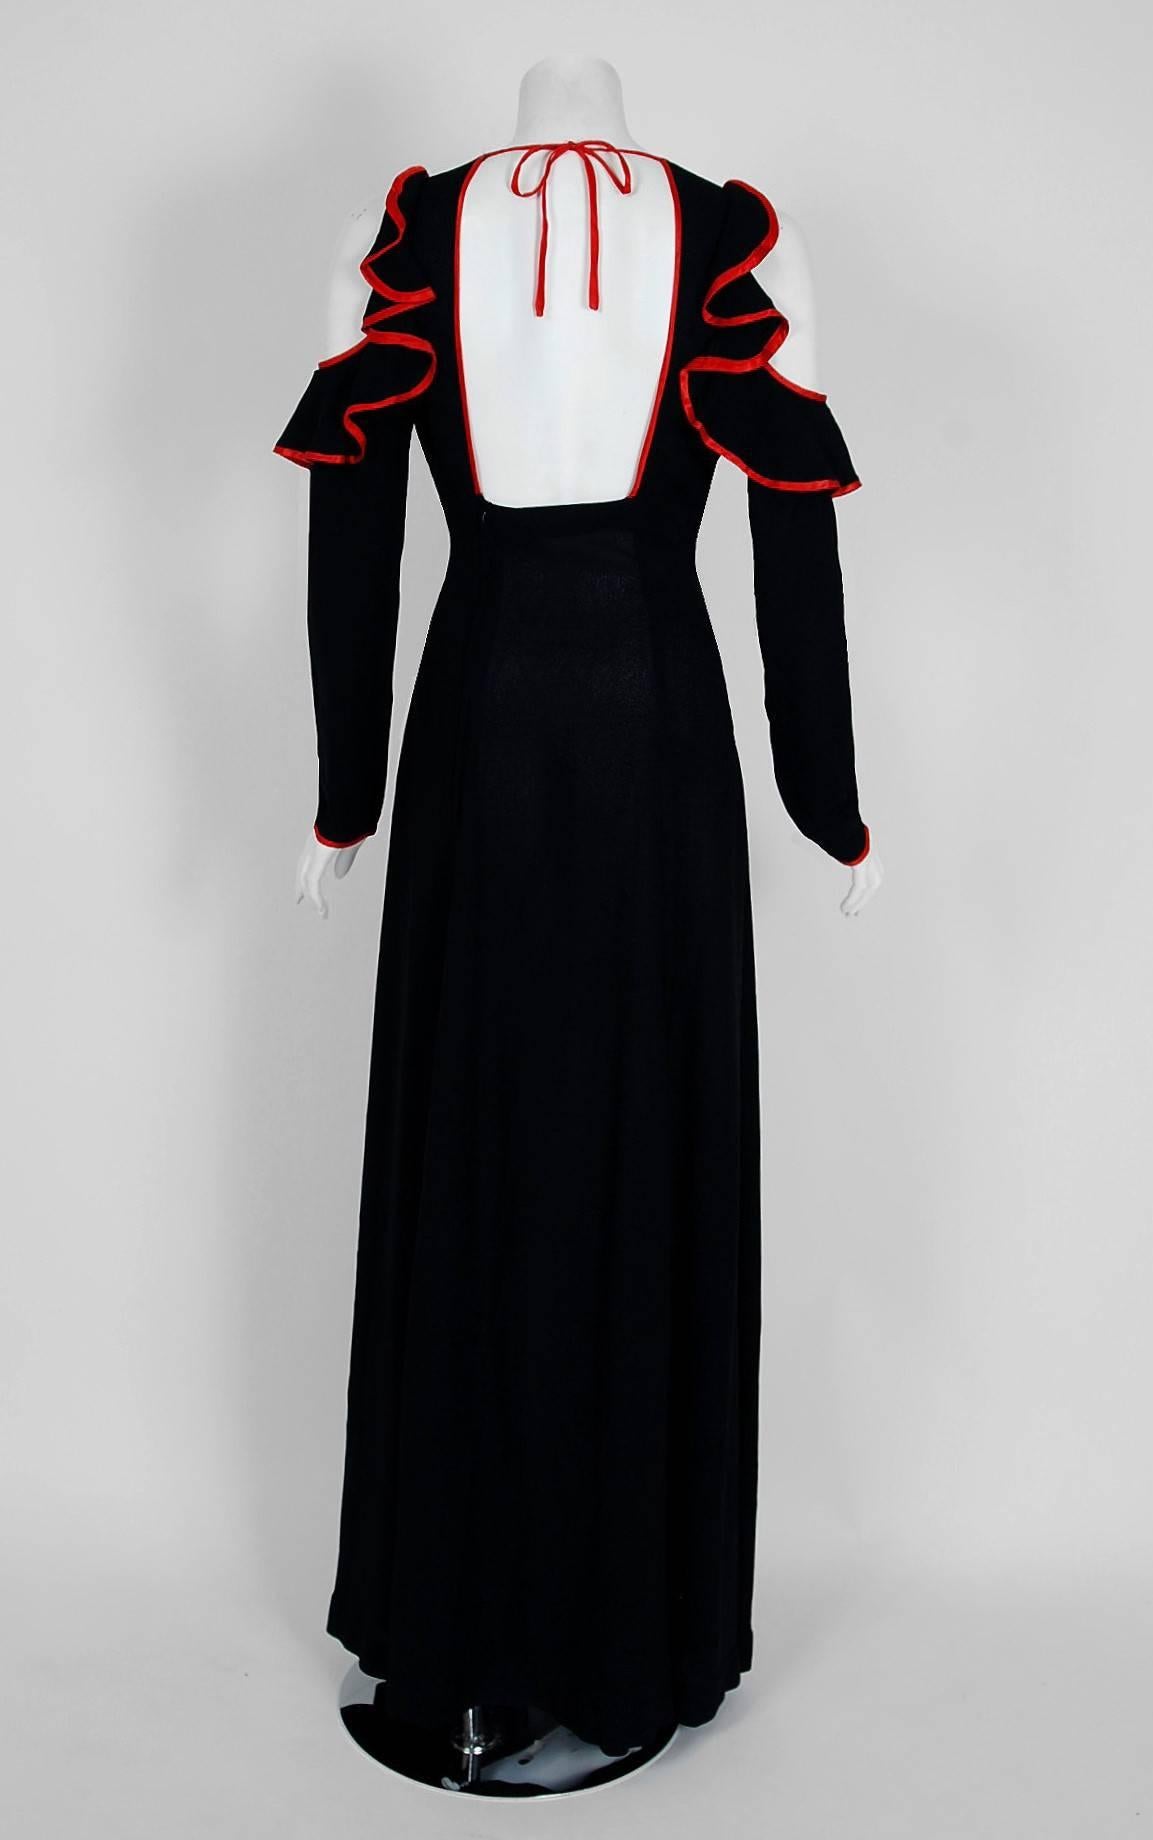 Women's 1970's Ossie Clark Black Moss-Crepe & Red Satin Cut-Out Ruffle Backless Dress